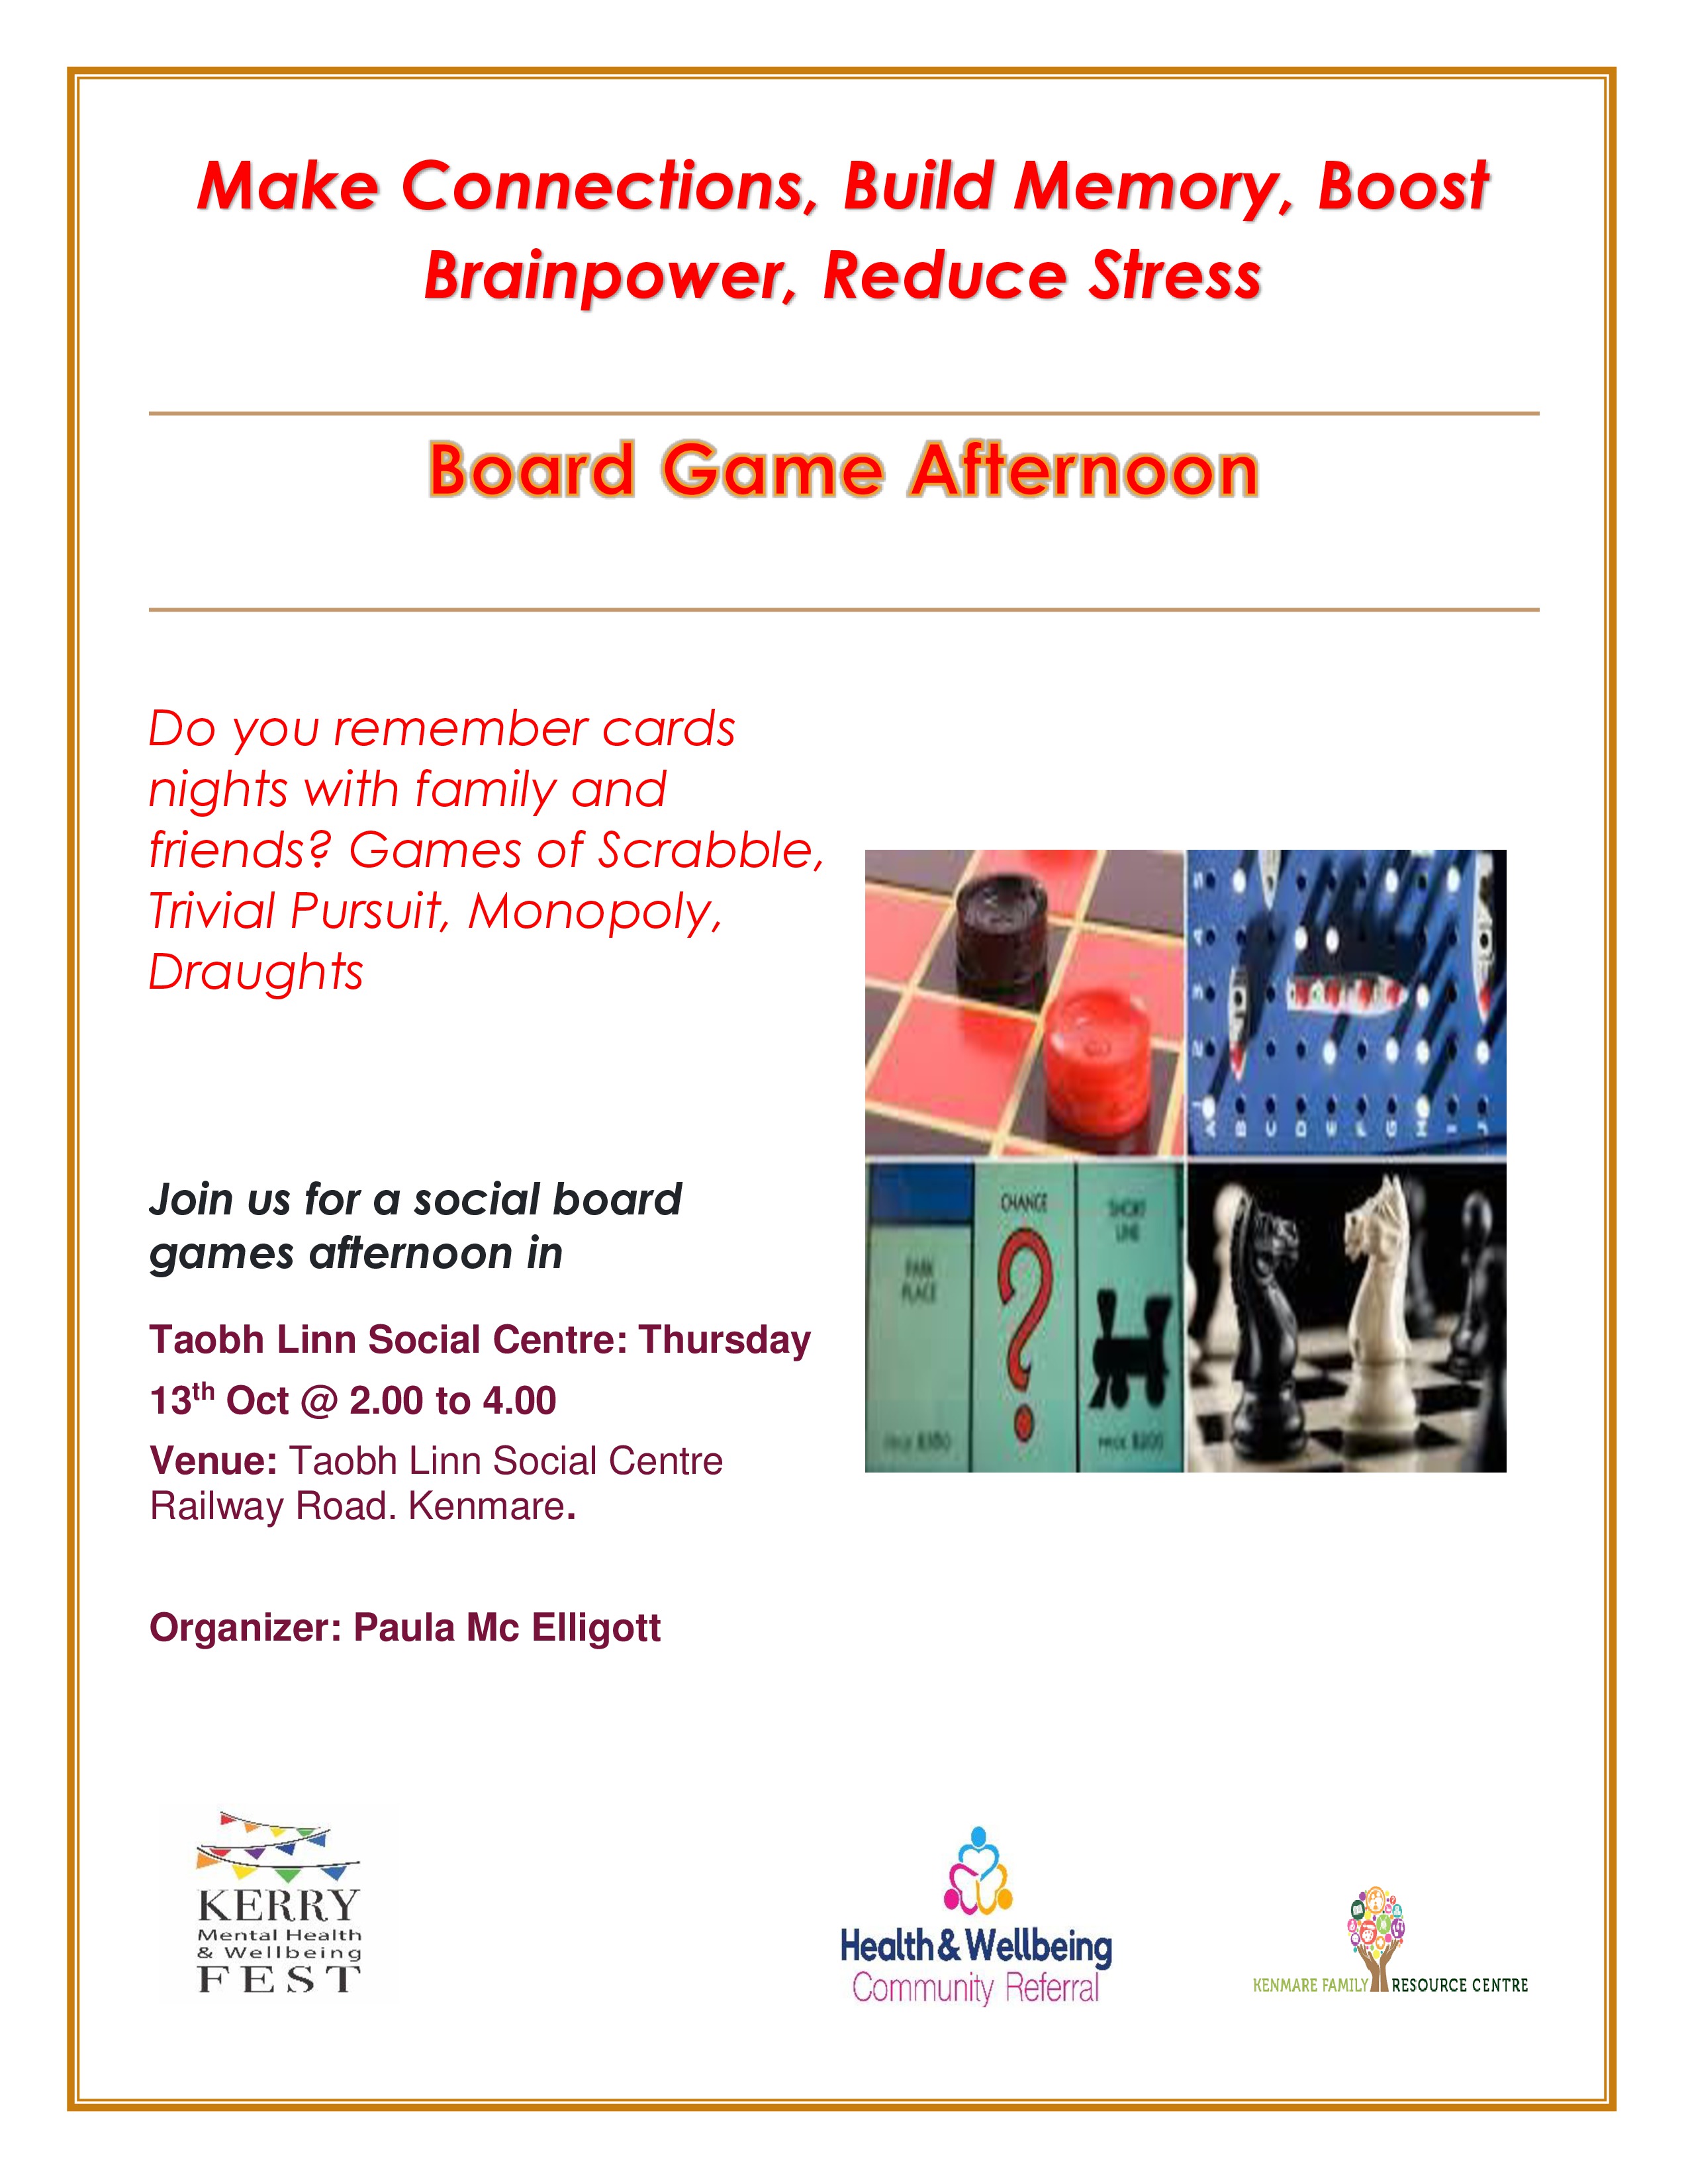 Board Game Afternoon event at Kerry Mental Health & Wellbeing Fest 2022